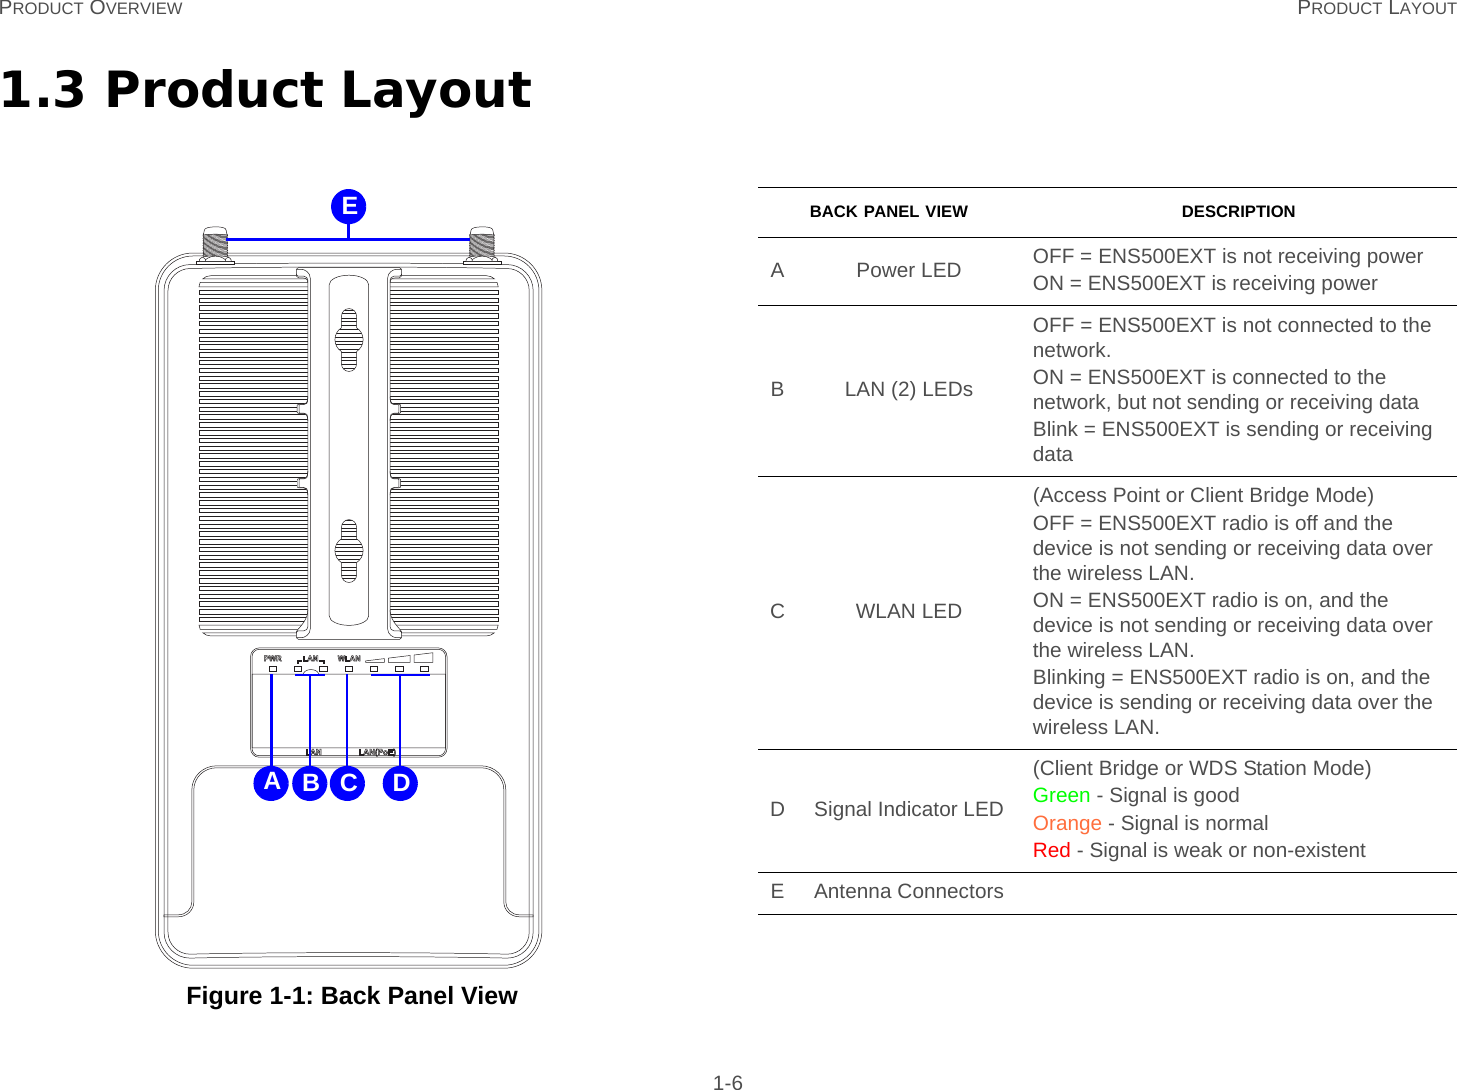 PRODUCT OVERVIEW PRODUCT LAYOUT 1-61.3 Product Layout Figure 1-1: Back Panel ViewAB C DEBACK PANEL VIEW DESCRIPTIONA Power LED OFF = ENS500EXT is not receiving powerON = ENS500EXT is receiving powerB LAN (2) LEDsOFF = ENS500EXT is not connected to the network.ON = ENS500EXT is connected to the network, but not sending or receiving dataBlink = ENS500EXT is sending or receiving dataCWLAN LED(Access Point or Client Bridge Mode)OFF = ENS500EXT radio is off and the device is not sending or receiving data over the wireless LAN.ON = ENS500EXT radio is on, and the device is not sending or receiving data over the wireless LAN.Blinking = ENS500EXT radio is on, and the device is sending or receiving data over the wireless LAN.D Signal Indicator LED(Client Bridge or WDS Station Mode)Green - Signal is goodOrange - Signal is normalRed - Signal is weak or non-existentE Antenna Connectors